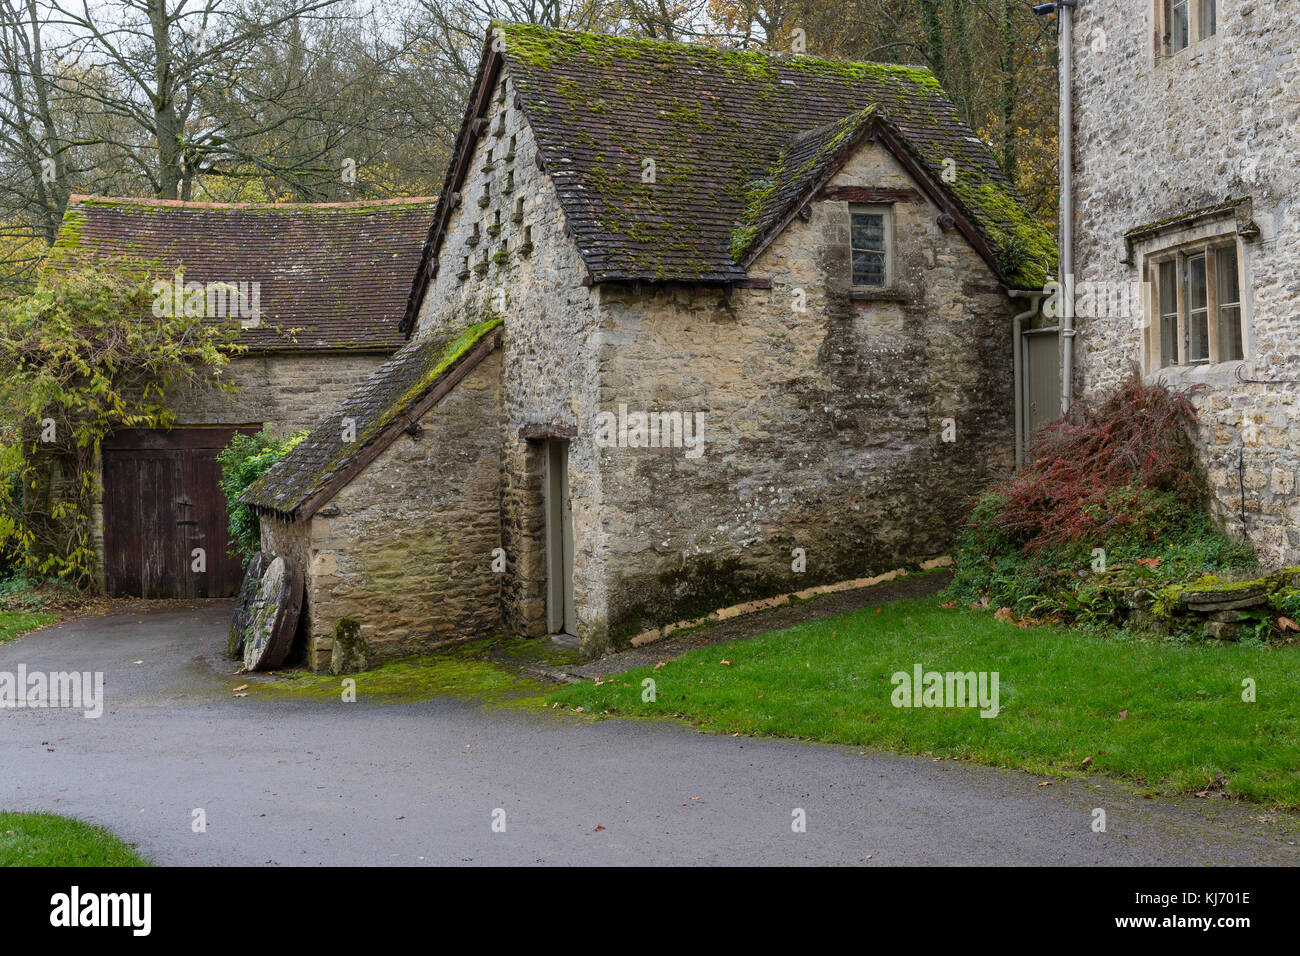 Five Signposts for public footpaths at Bibury, Cotswolds, Gloucestershire UK Stock Photo